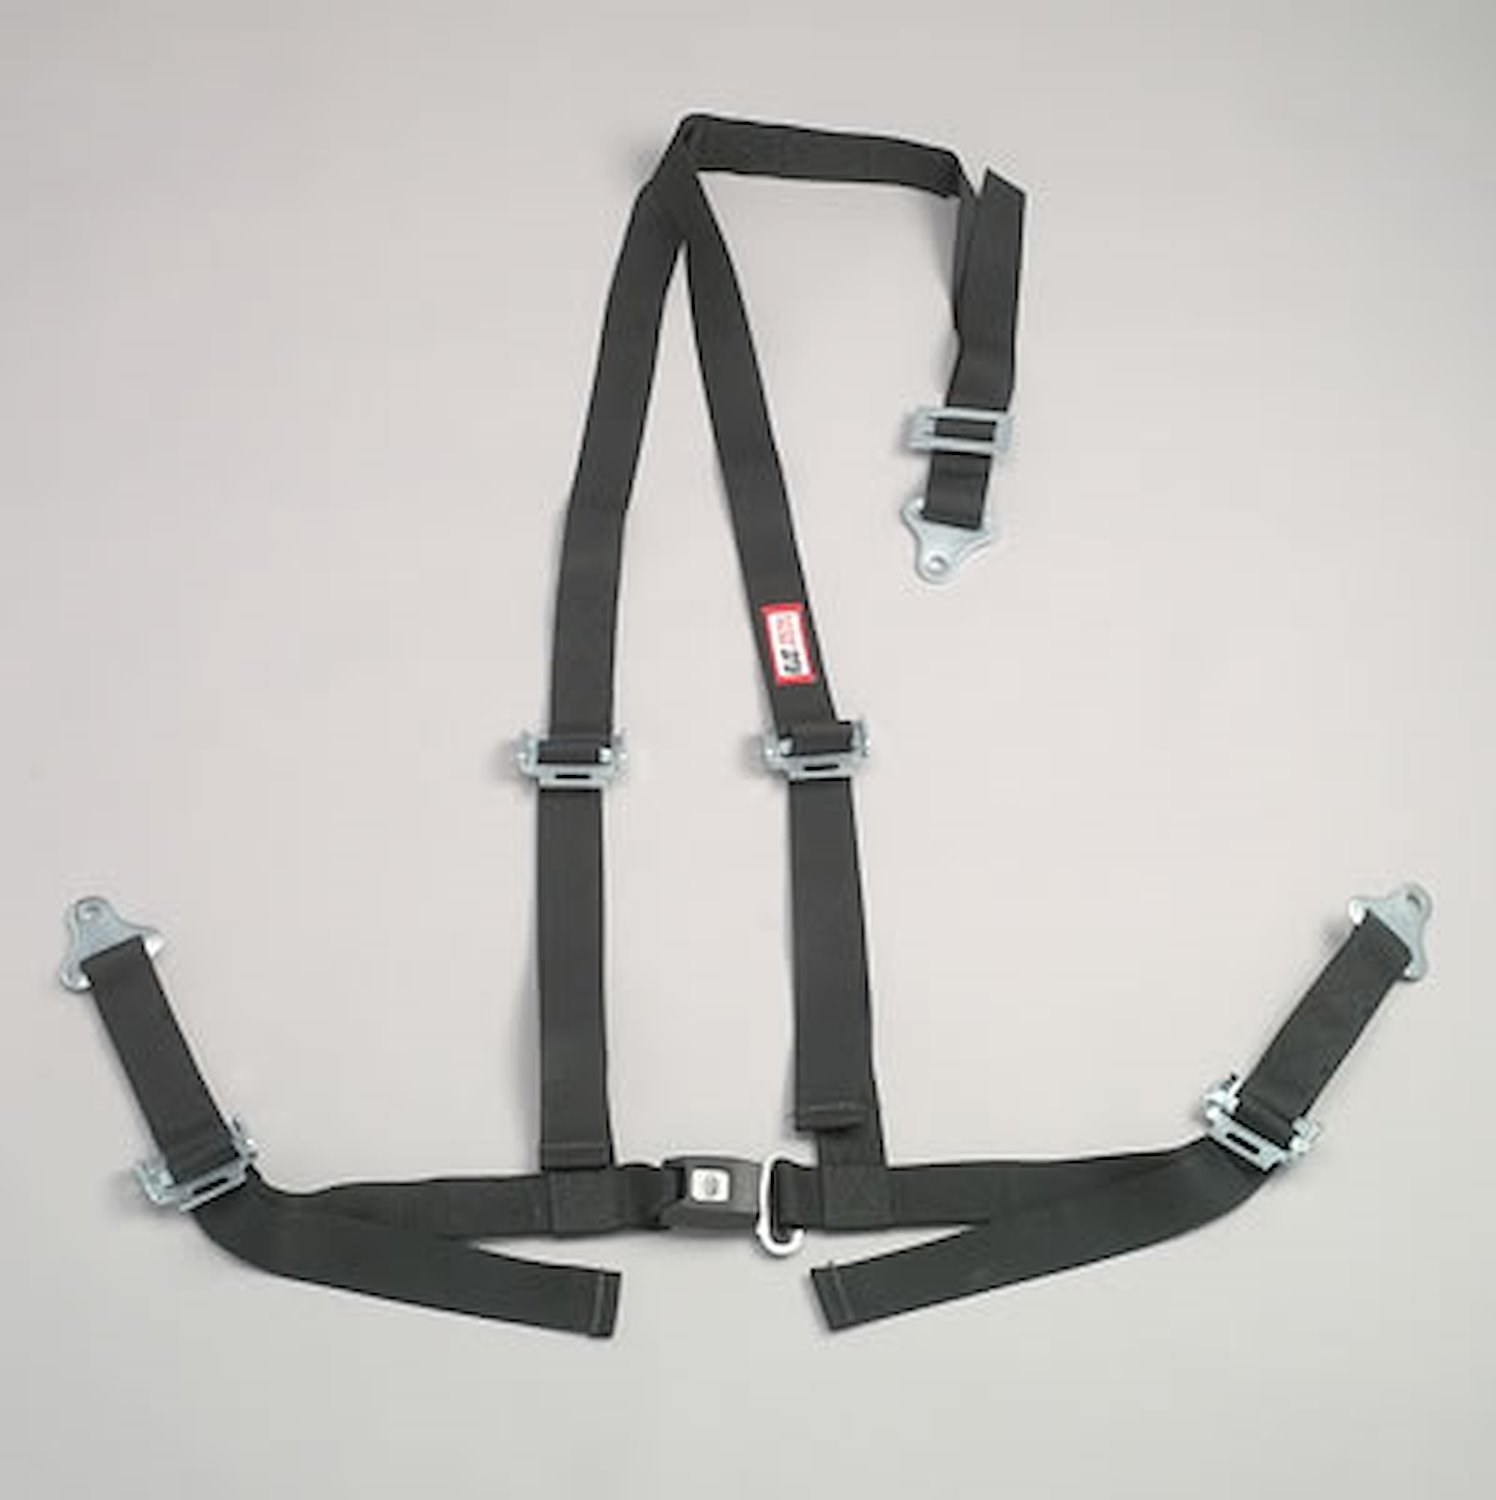 NON-SFI B&T HARNESS 2 PULL UP Lap Belt SNAP 2 S. H. Y FLOOR Mount WRAP/SNAP OD GREEN